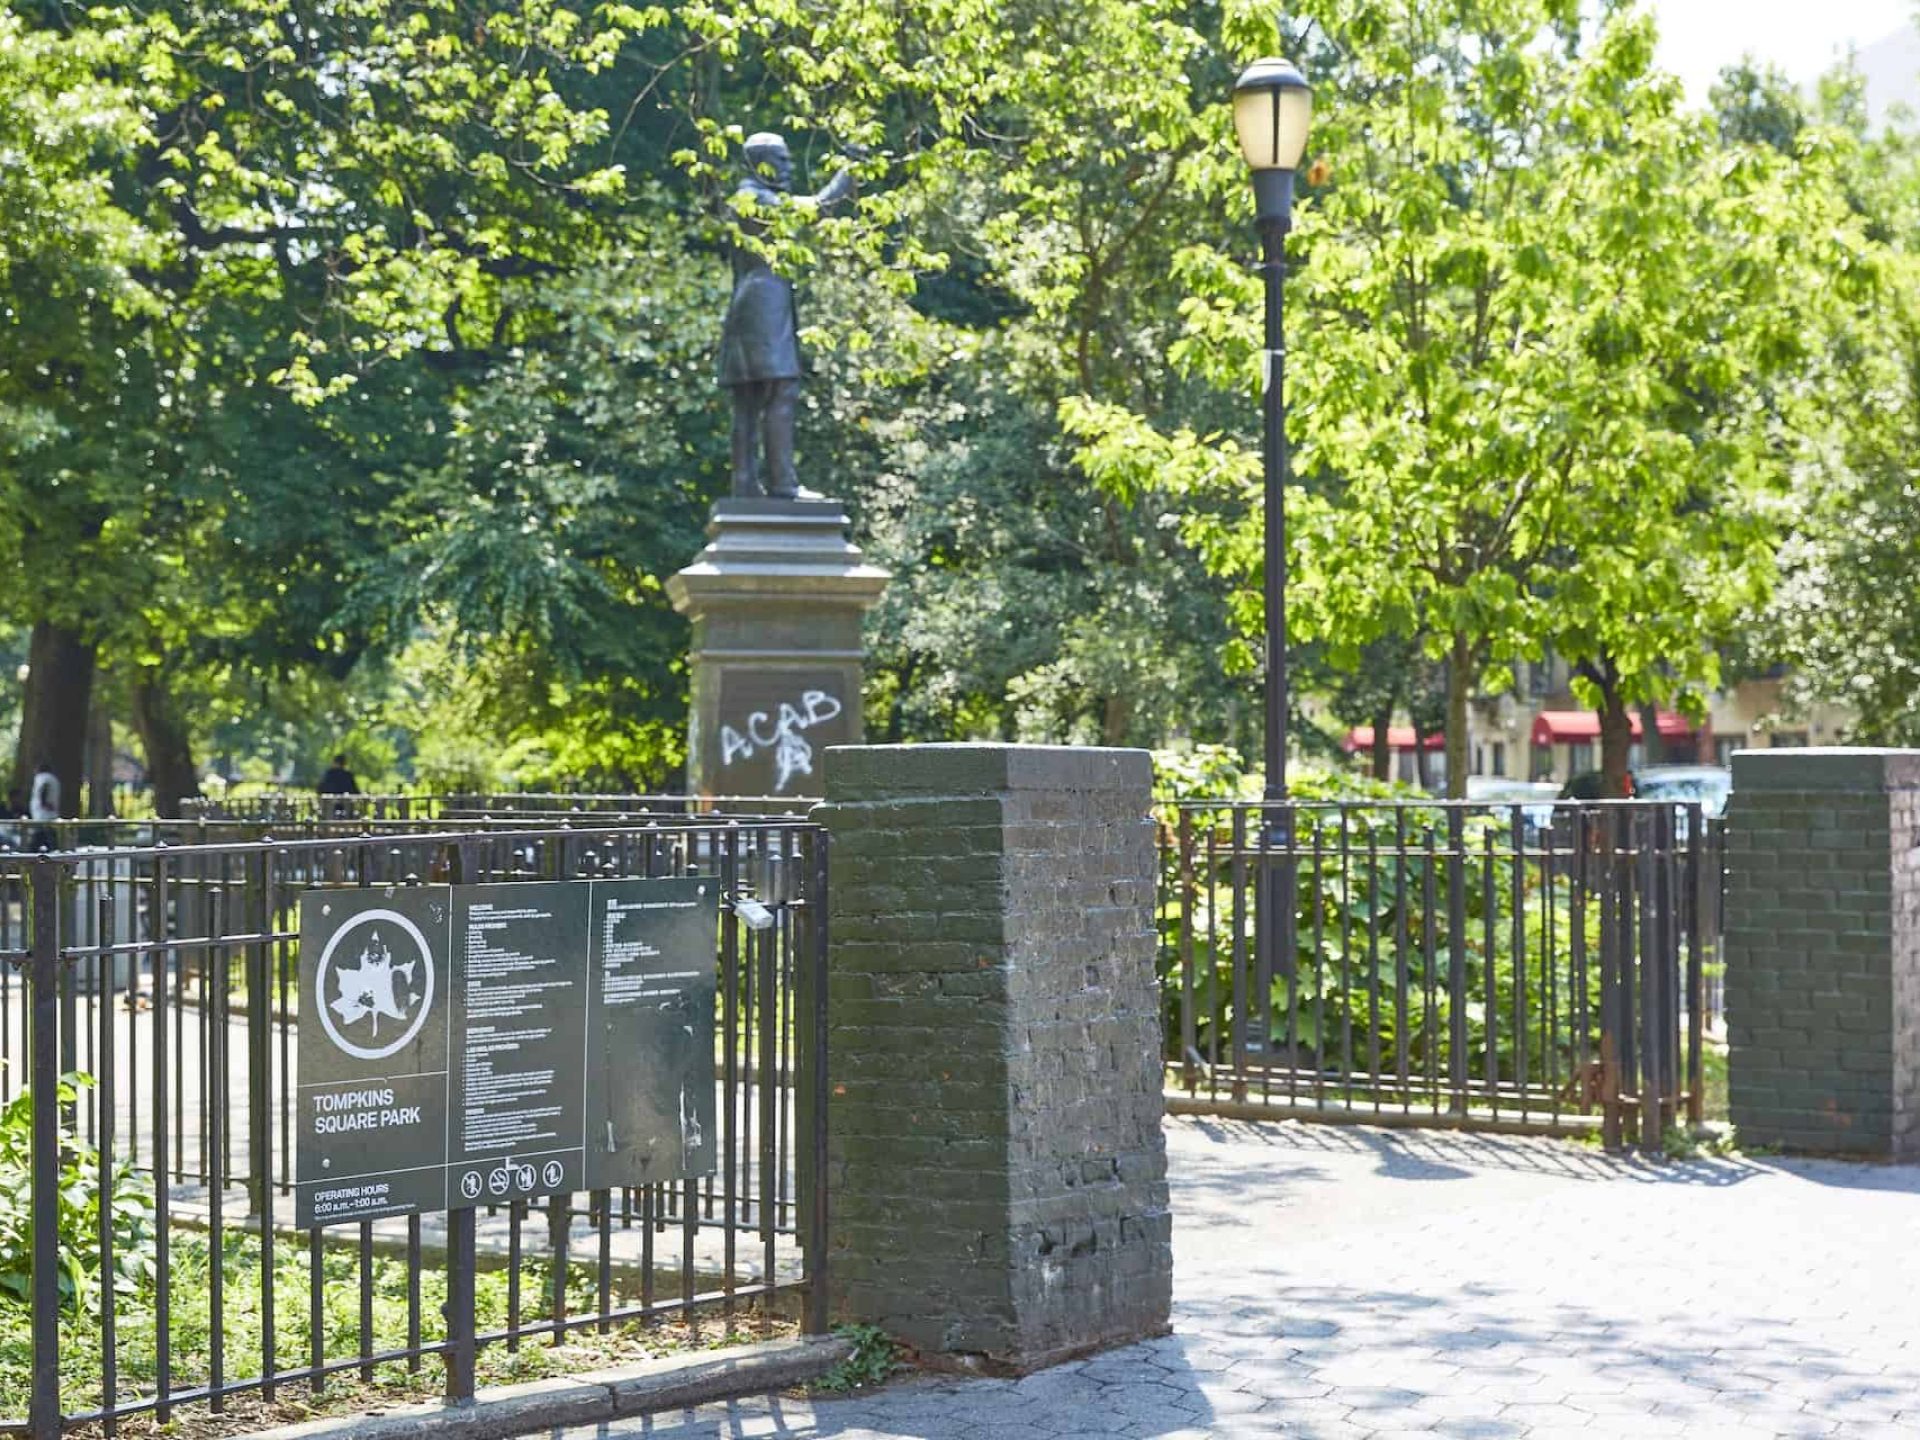 Daytime picture of entrance to Tompkins Square Park. Green iron fences with park sign attached and statue in the background.